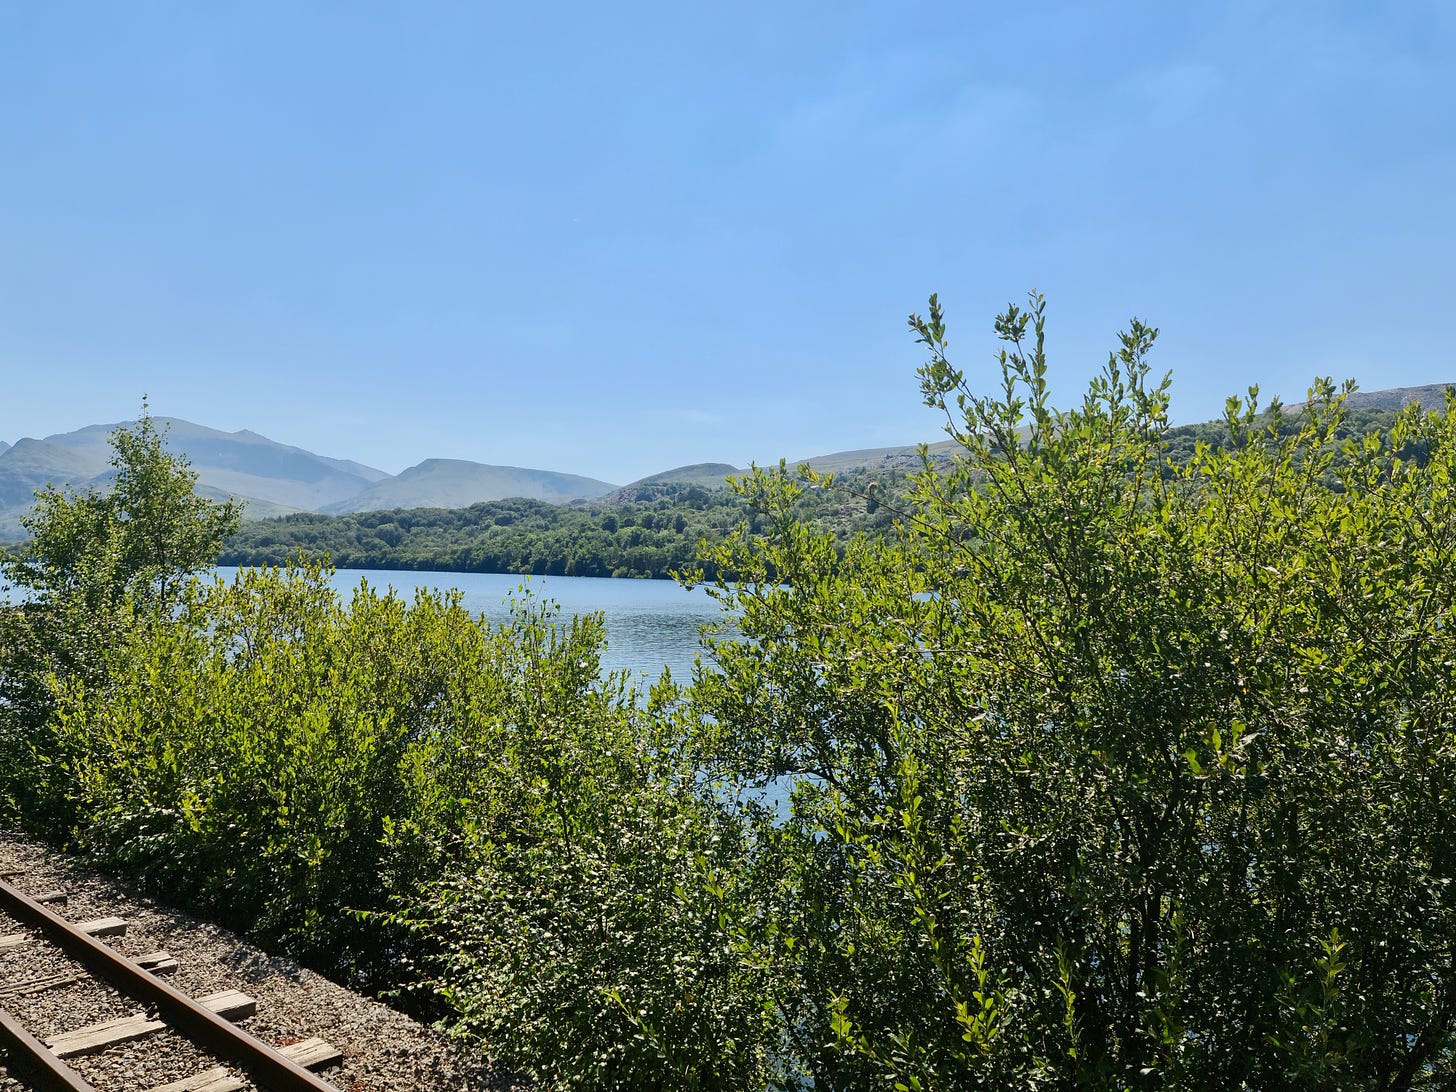 A view from a train next to a lake, showing the track, plants, water, and mountains, with a clear blue sky.